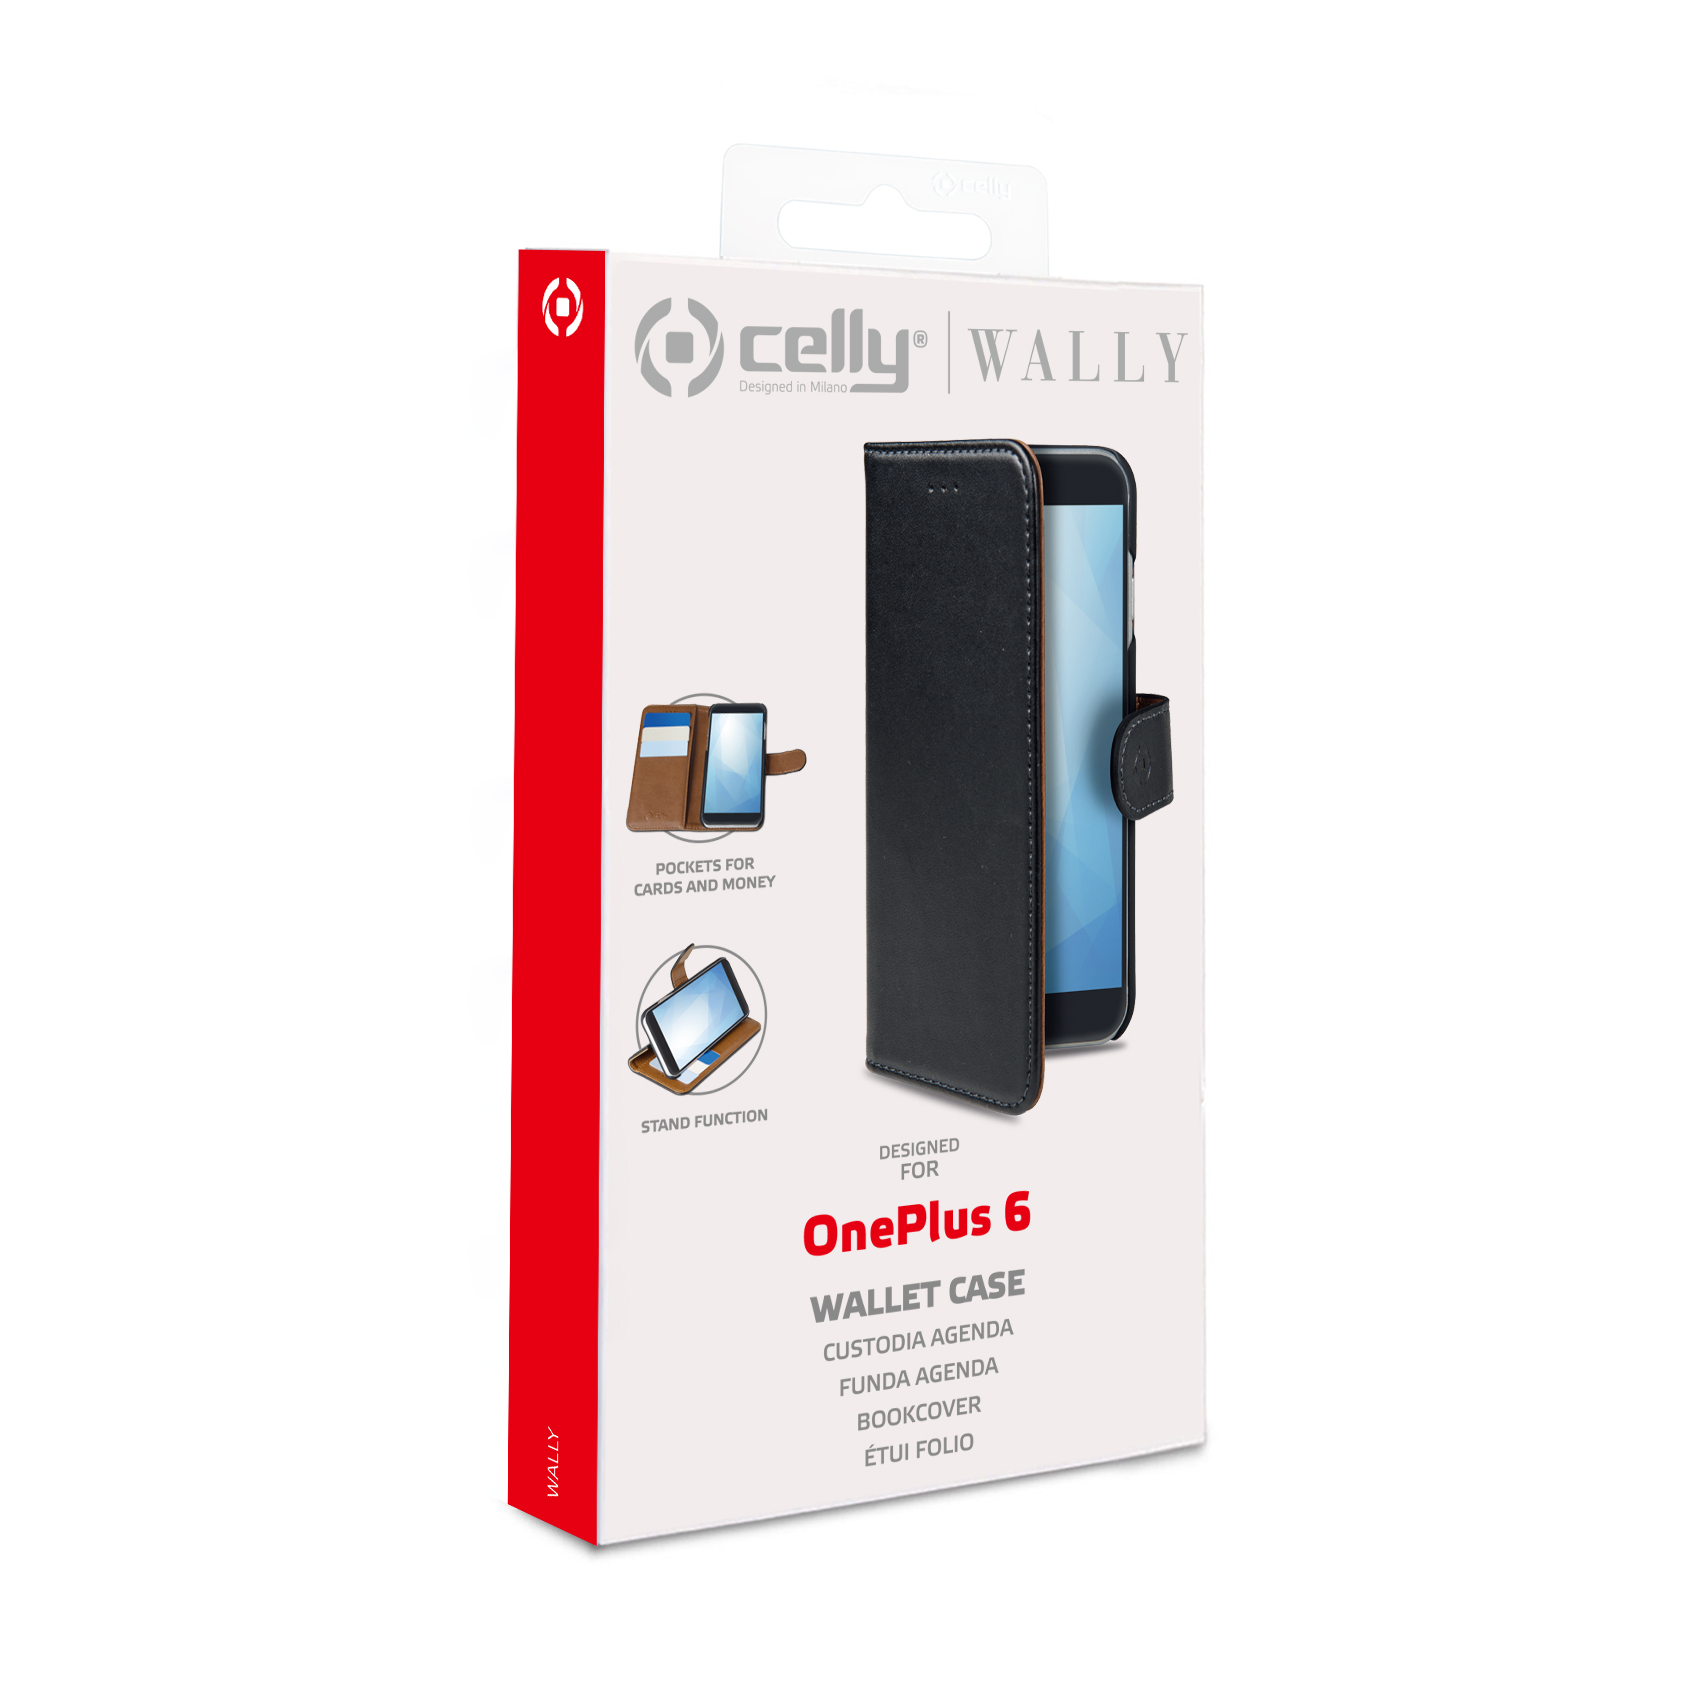 Wally Case Oneplus 6 Black Celly Wally743 8021735745129